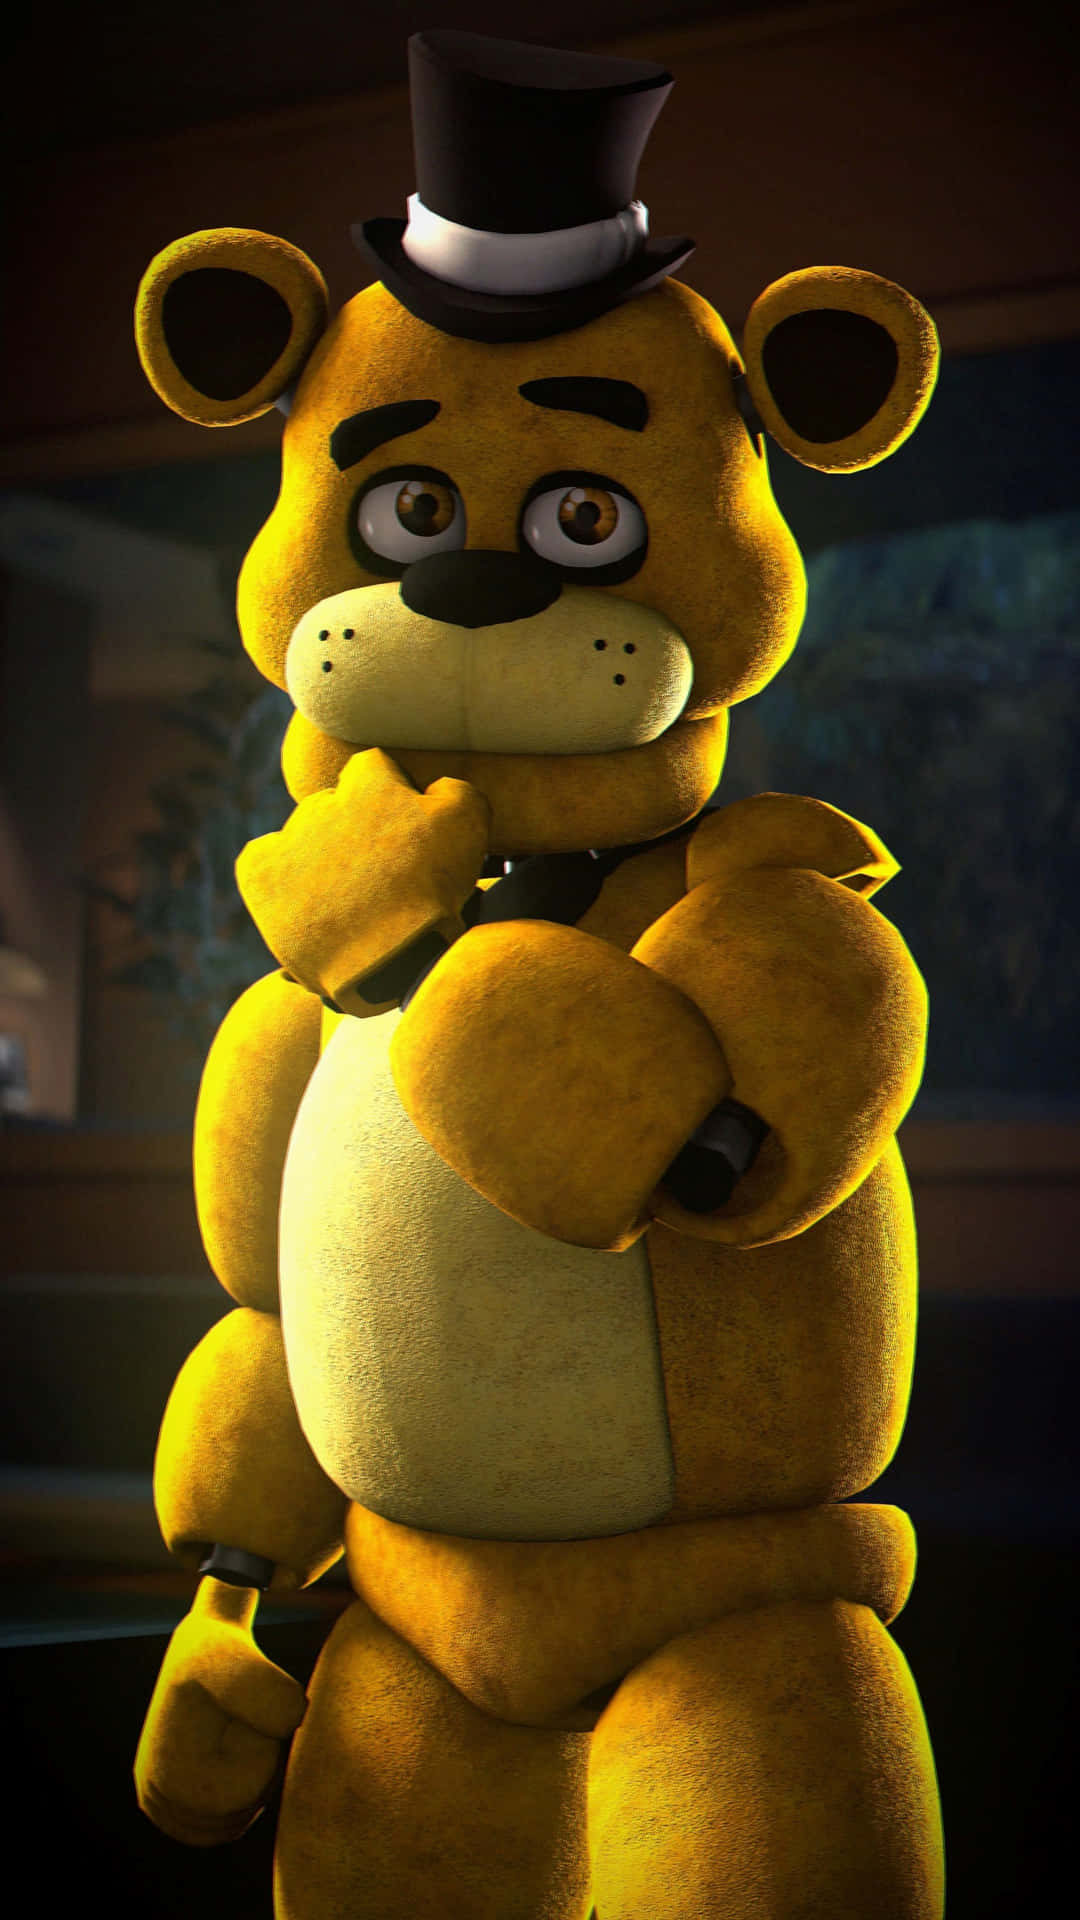 Golden Freddy from Five Nights at Freddy's Wallpaper